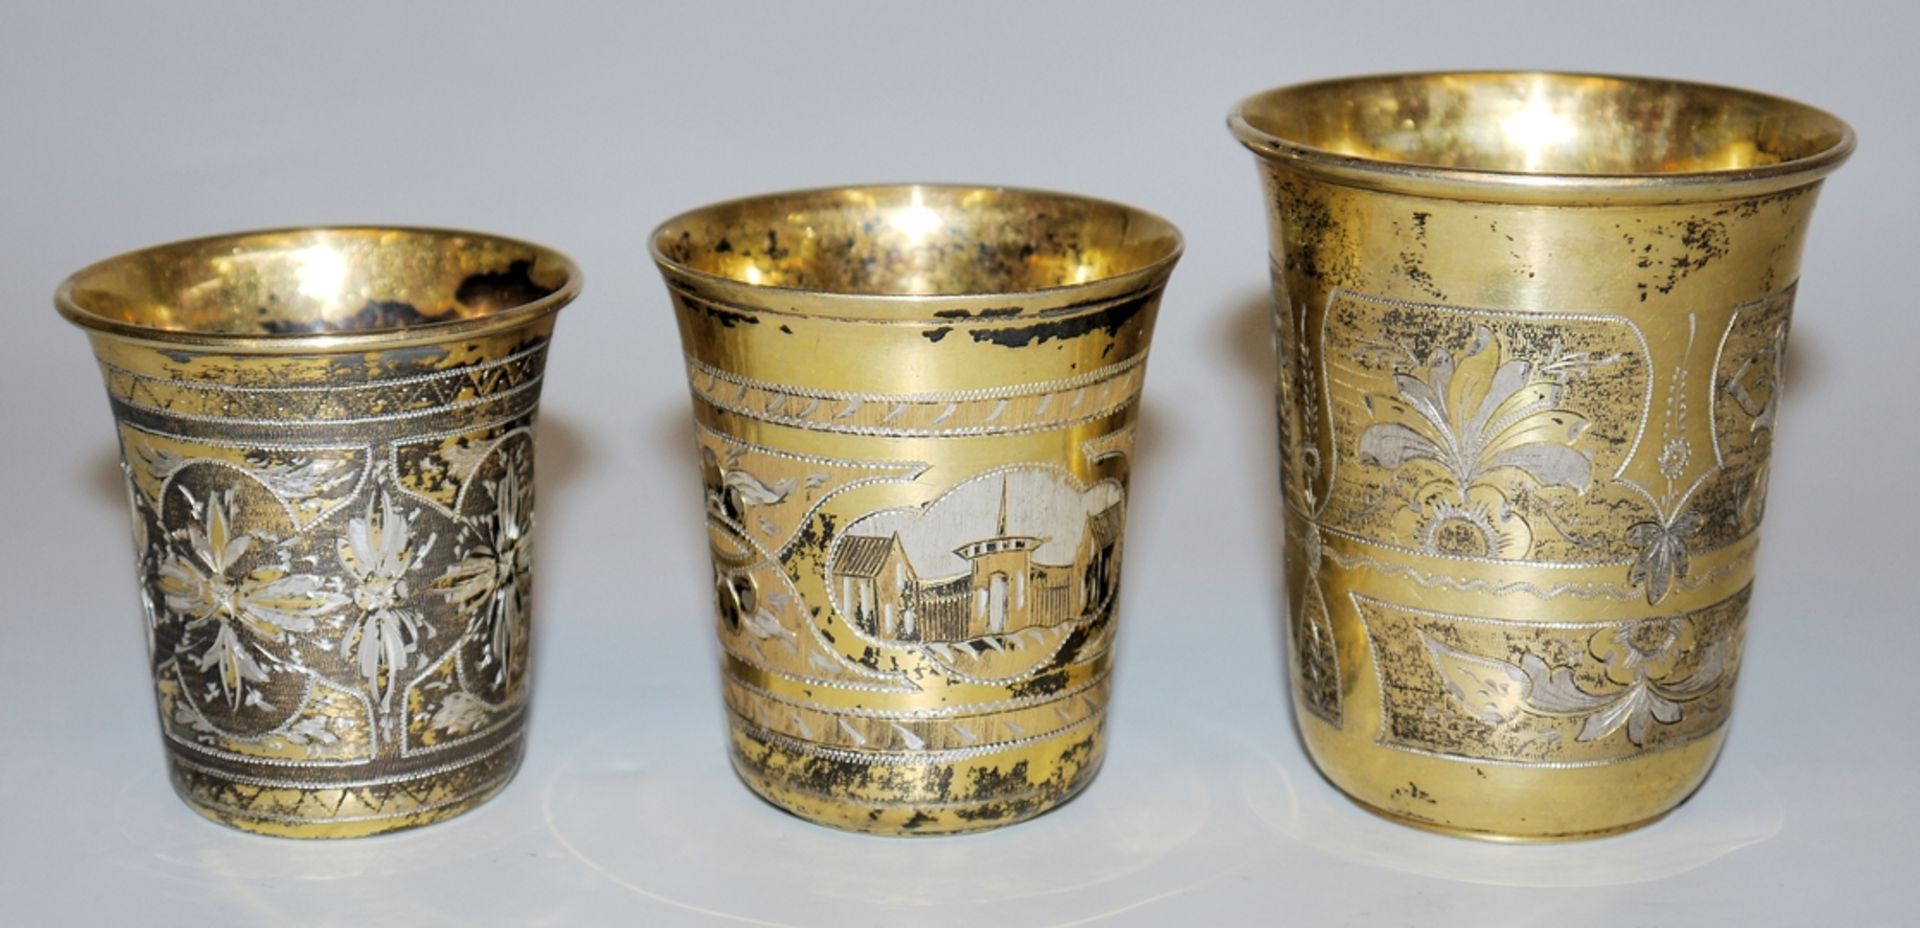 Three Russian silver cups with guilloché decoration, Moscow 1870-73